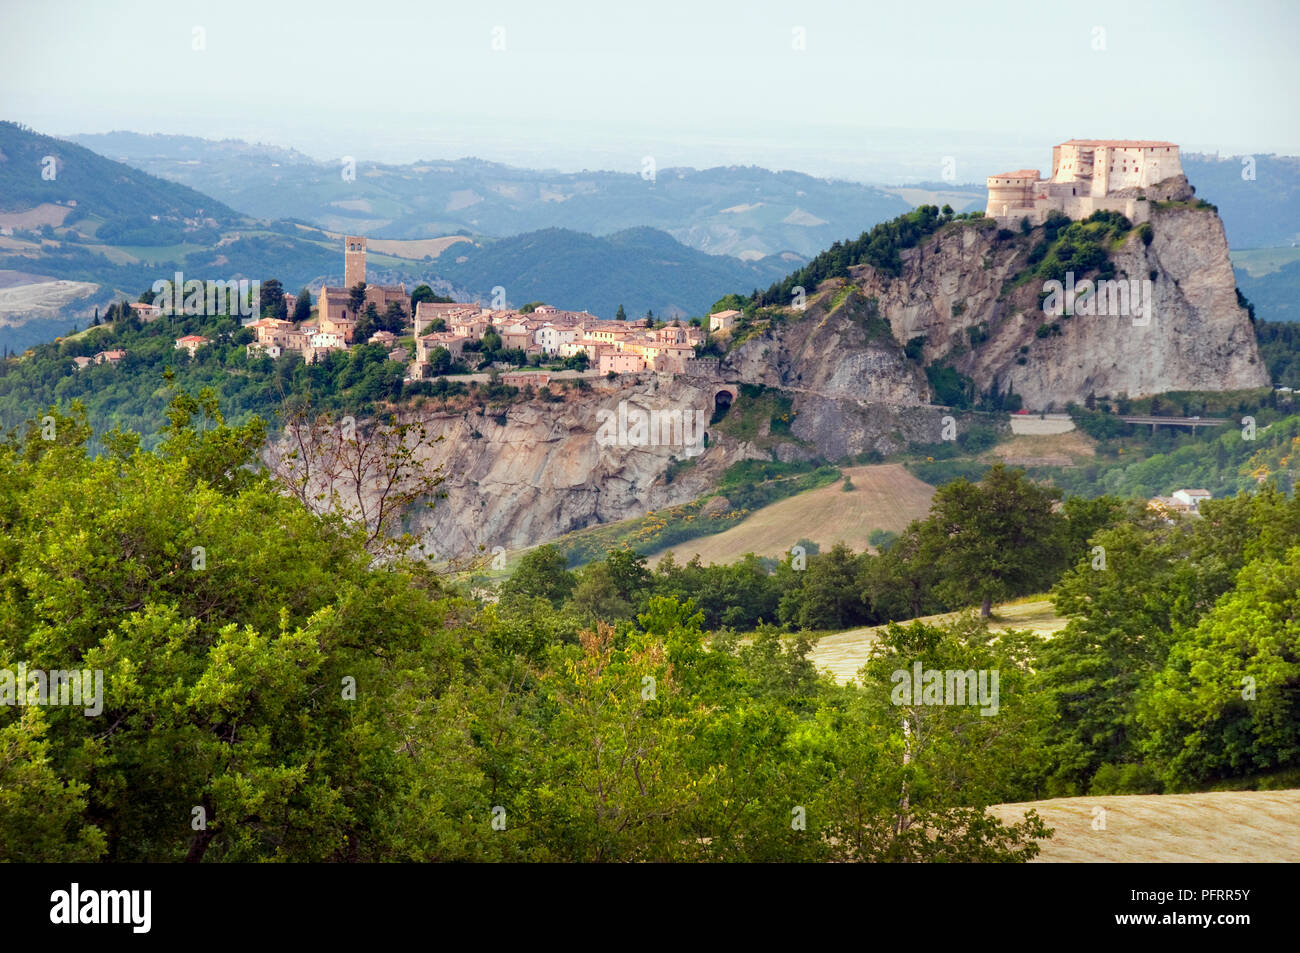 Italy, Emilia-Romagna, Rimini, San Leo, countryside and landscape with town built on mountain in distance Stock Photo